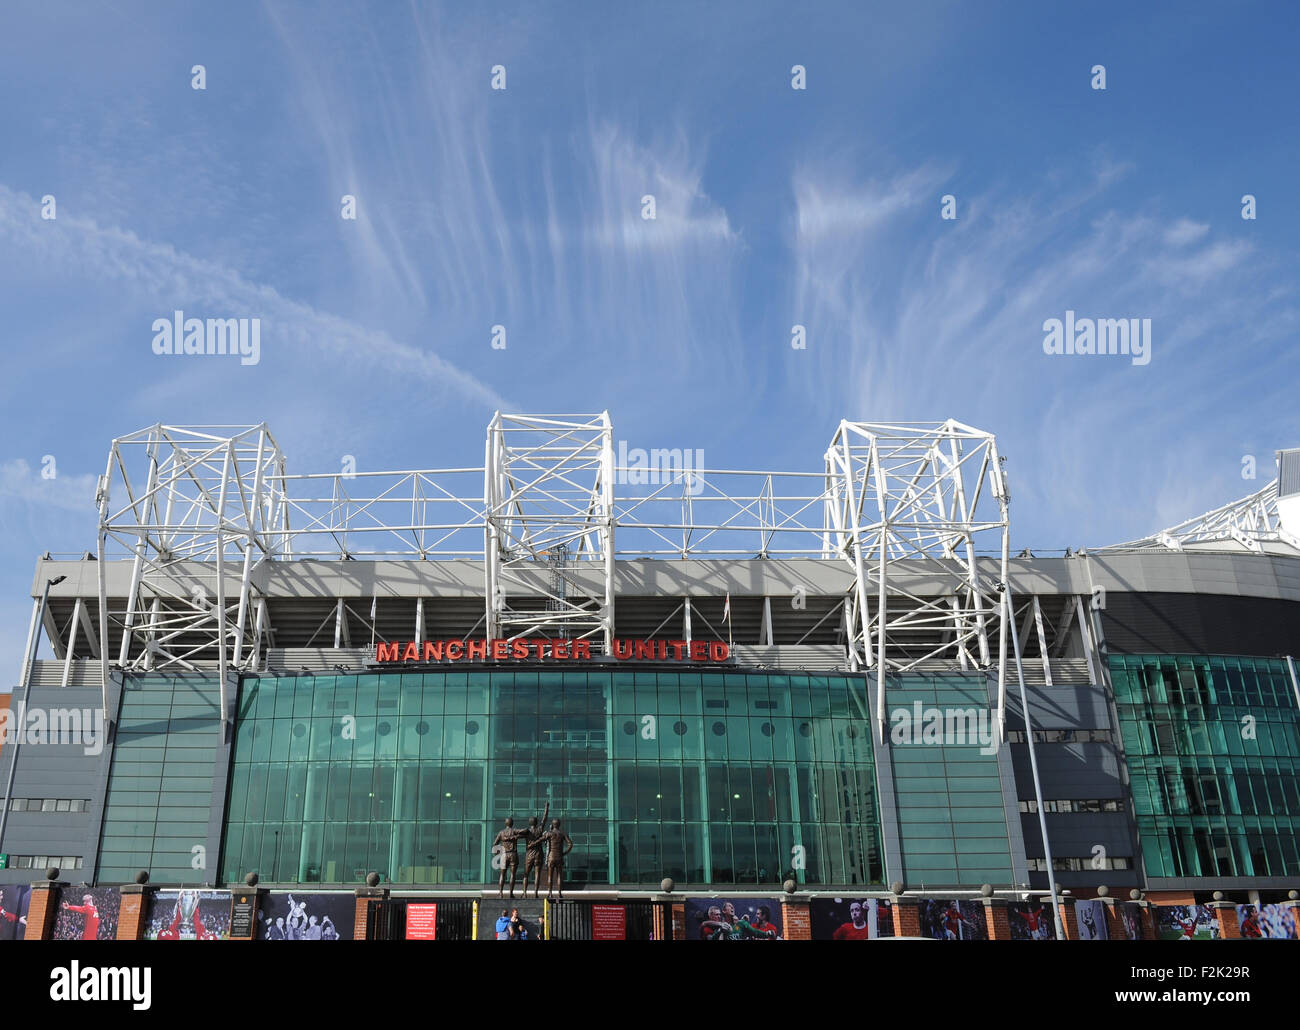 Manchester United Football Club Stadion Old Trafford, Manchester Stockfoto